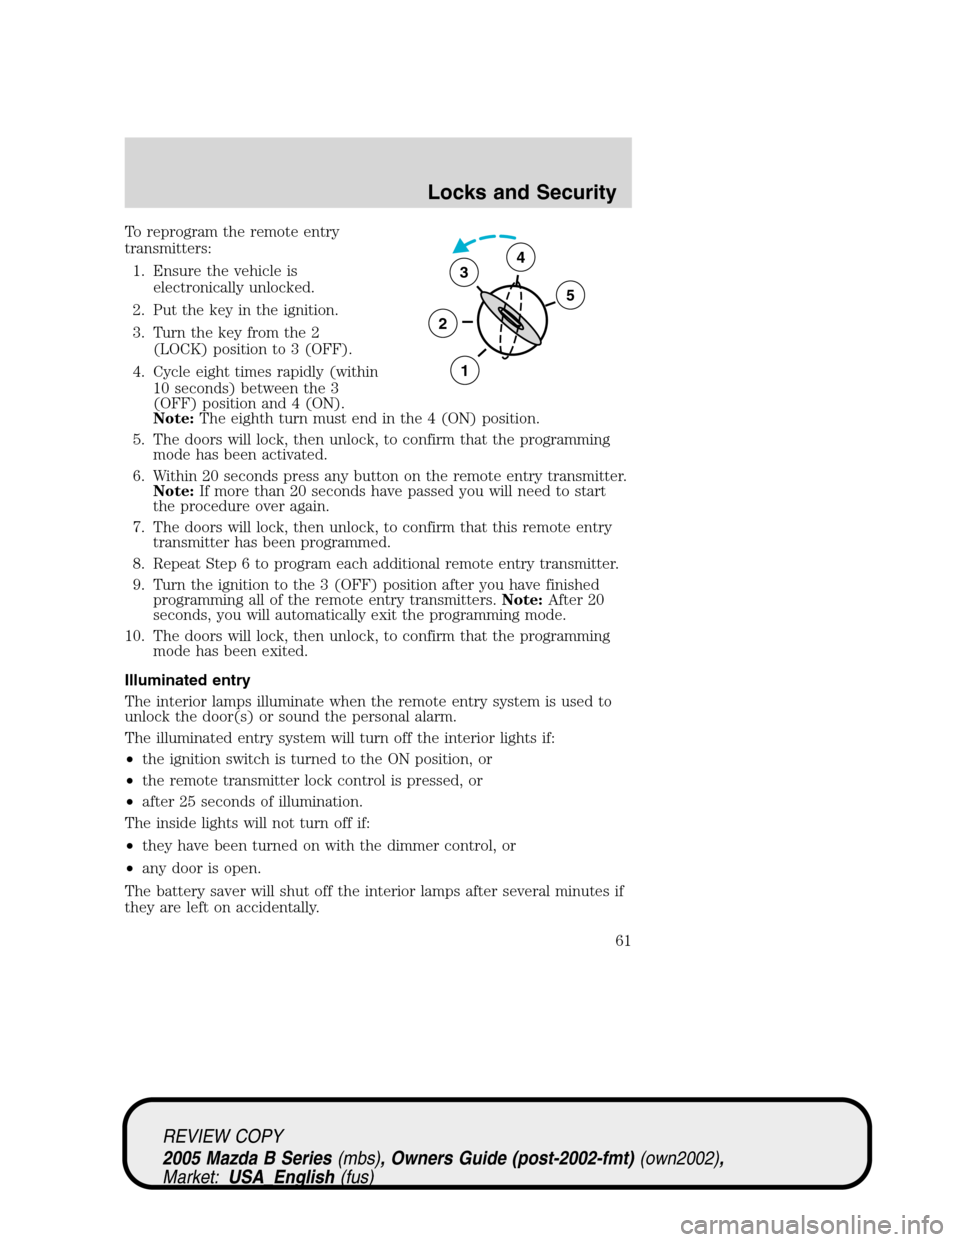 MAZDA MODEL B2300 TRUCK 2005  Owners Manual (in English) To reprogram the remote entry
transmitters:
1. Ensure the vehicle is
electronically unlocked.
2. Put the key in the ignition.
3. Turn the key from the 2
(LOCK) position to 3 (OFF).
4. Cycle eight time